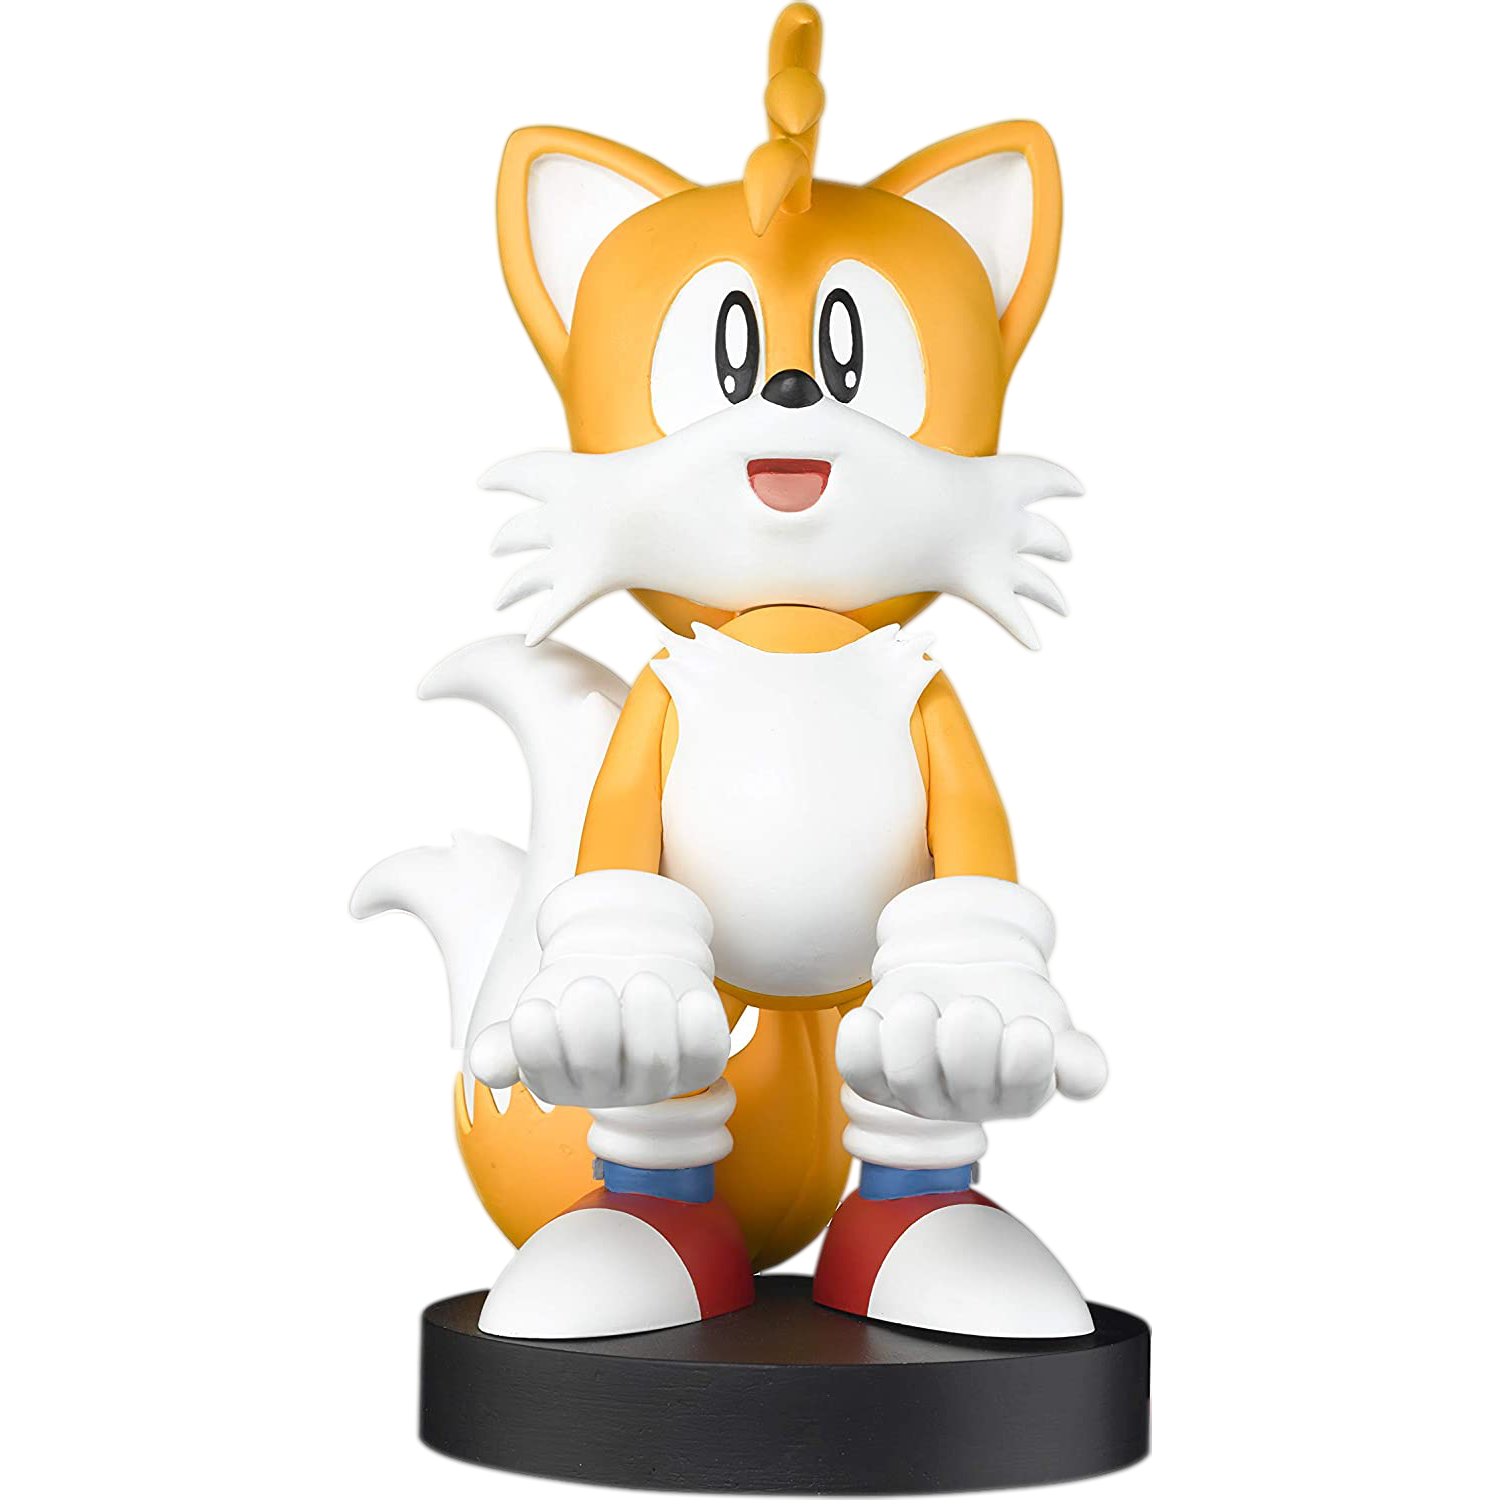 Tails-Controller-Holder-For-Xbox-and-PlayStation